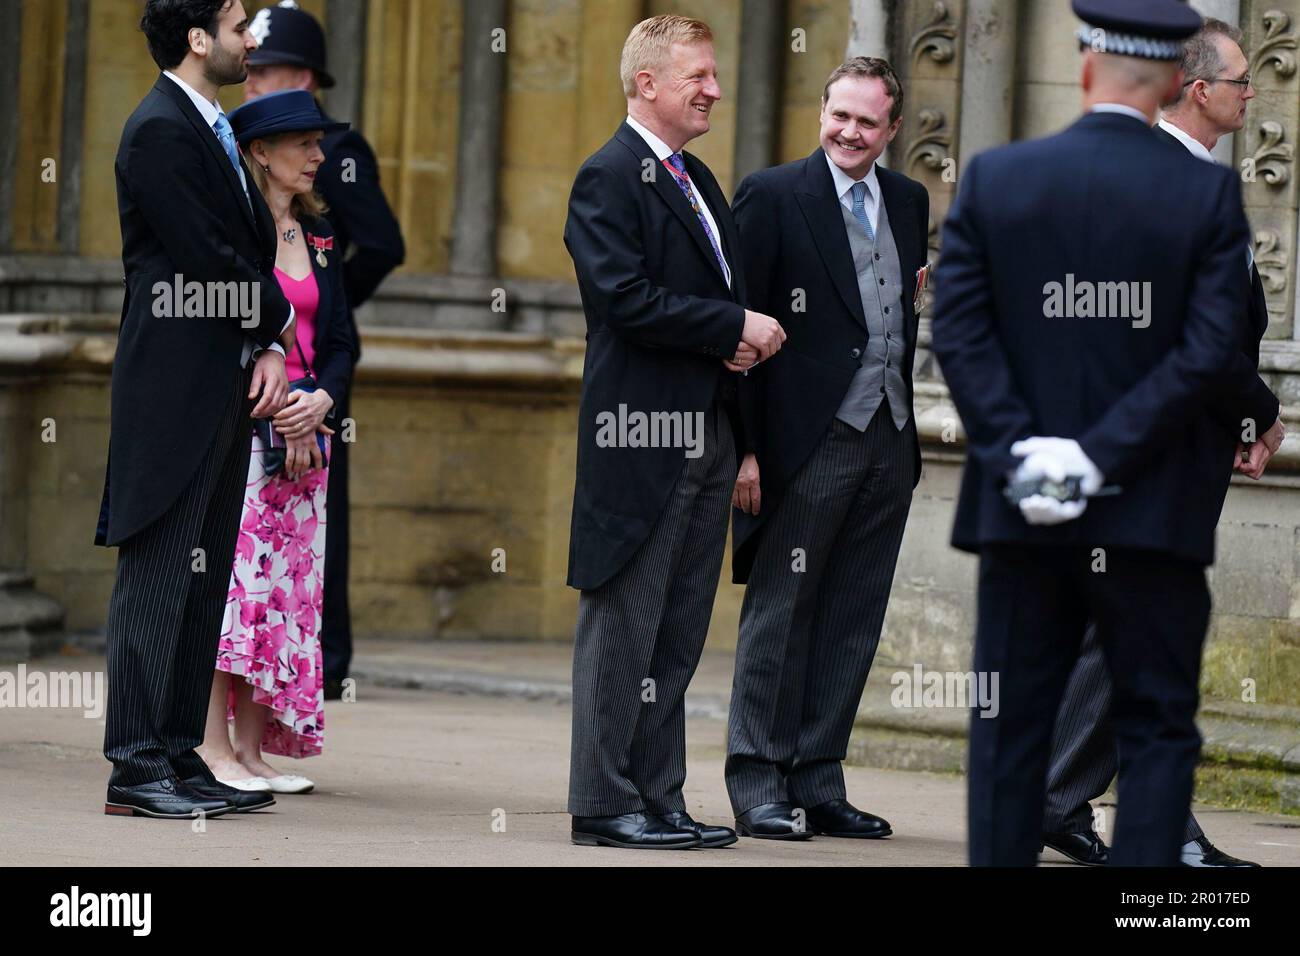 Deputy Prime Minister Oliver Dowden, center, arrives ahead of the coronation ceremony of King Charles III at Westminster Abbey, London, Saturday, May 6, 2023. (Jane Barlow/Pool Photo via AP) Stock Photo